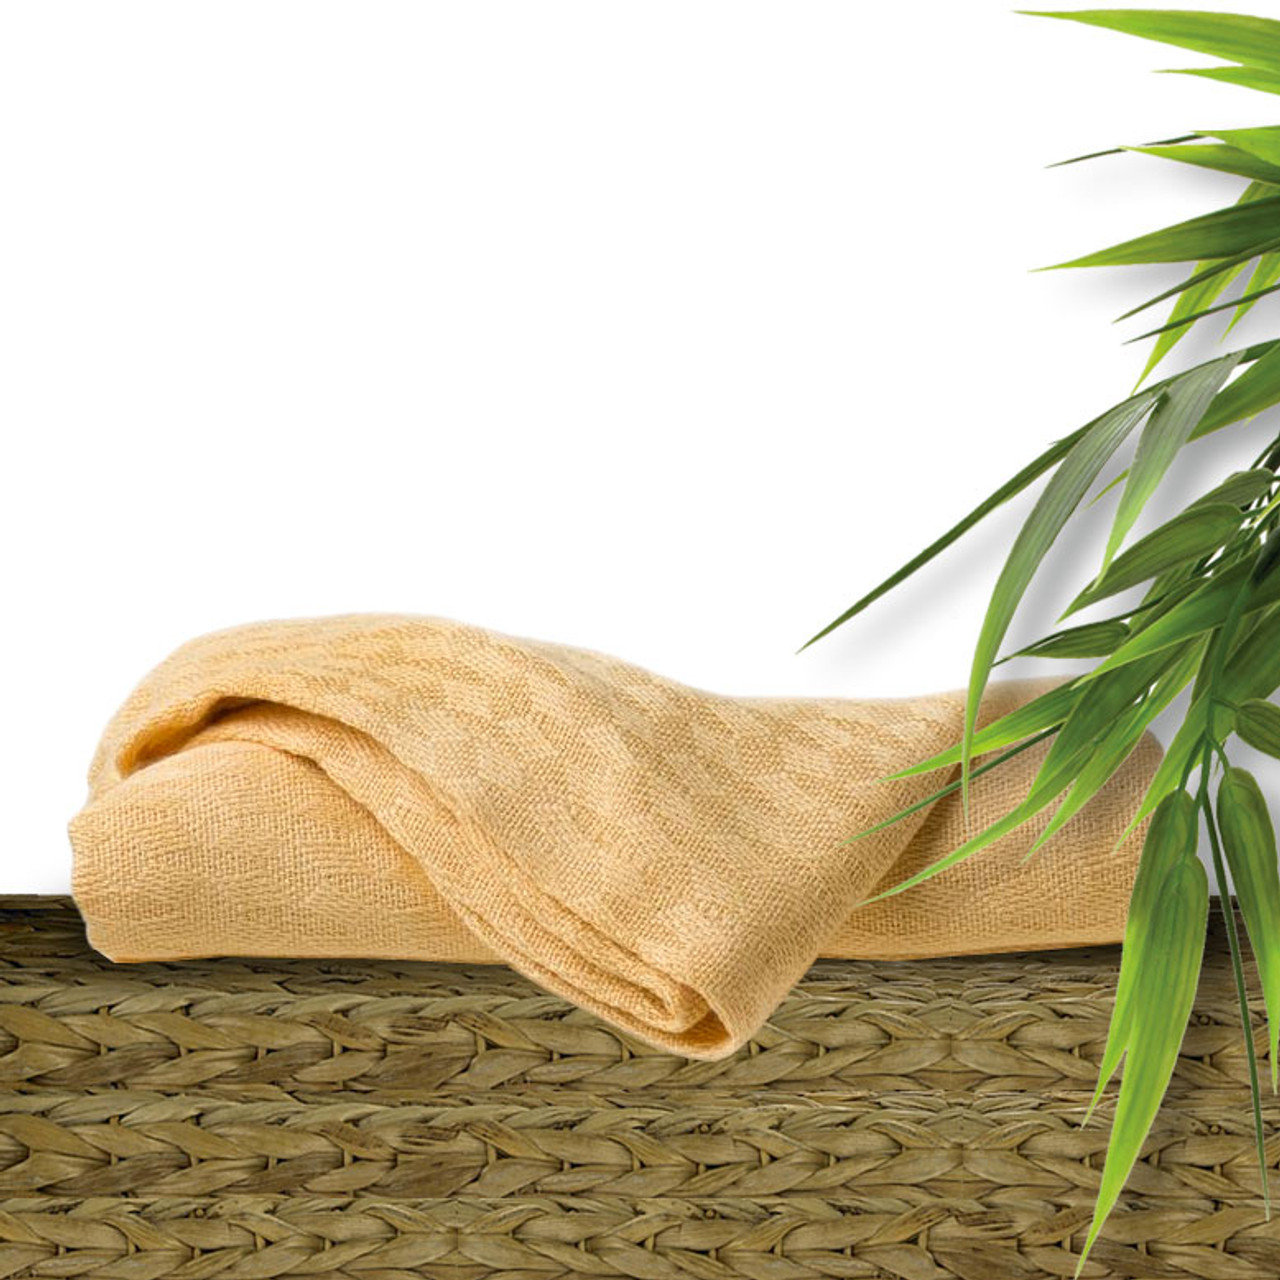 Bamboo Eco-Luxe Bath Towel Sets  Bliss Villa by Dreamweave Bamboo